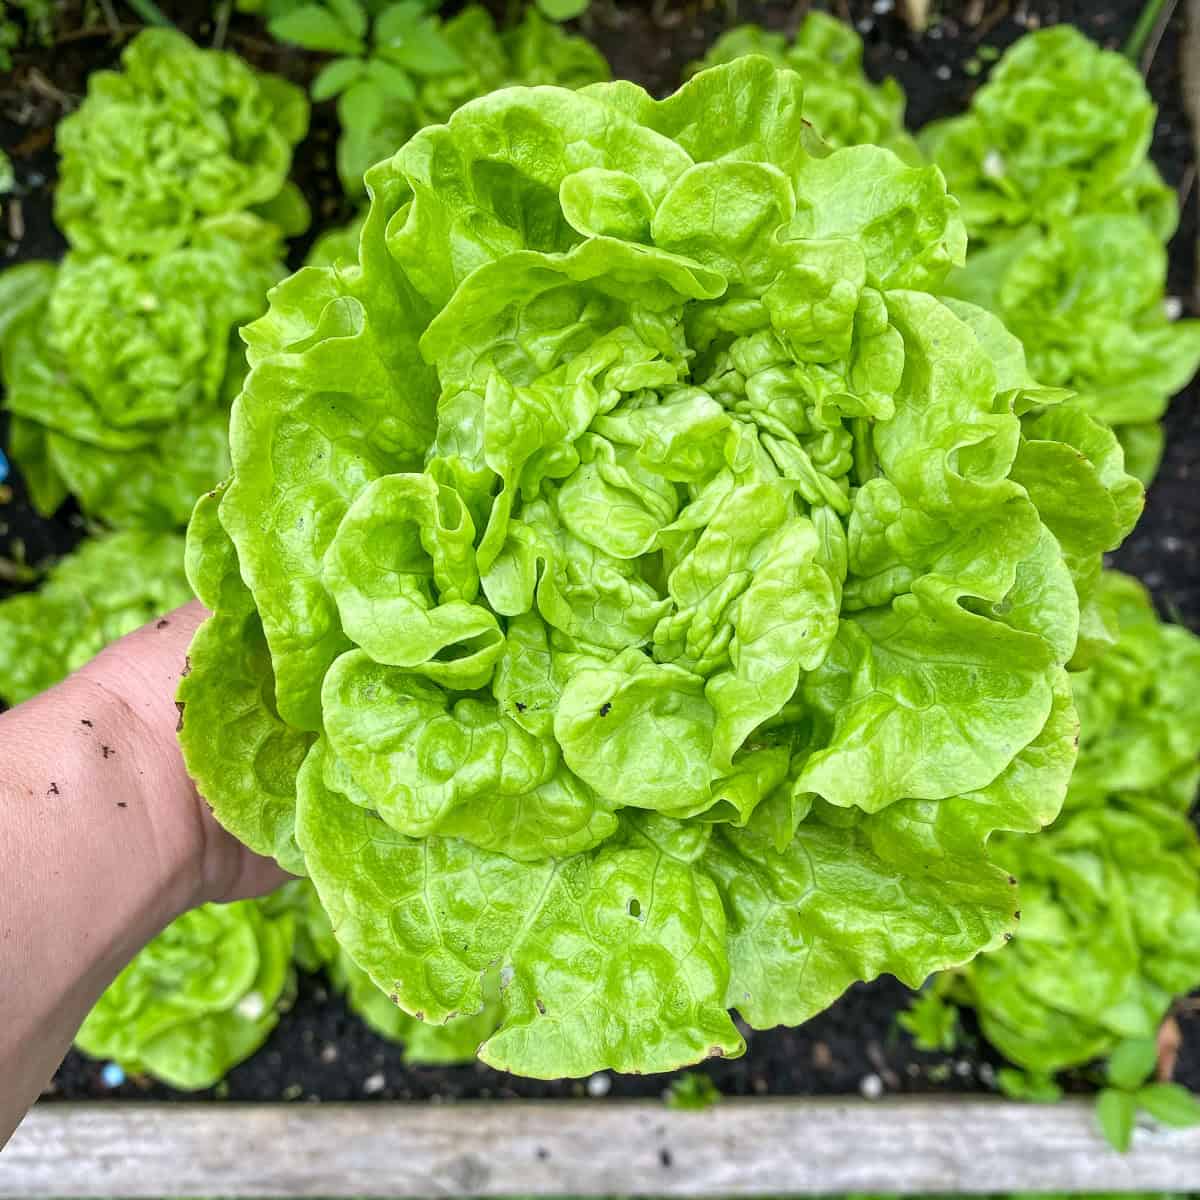 An image of a woman's hand holding a head of lettuce.